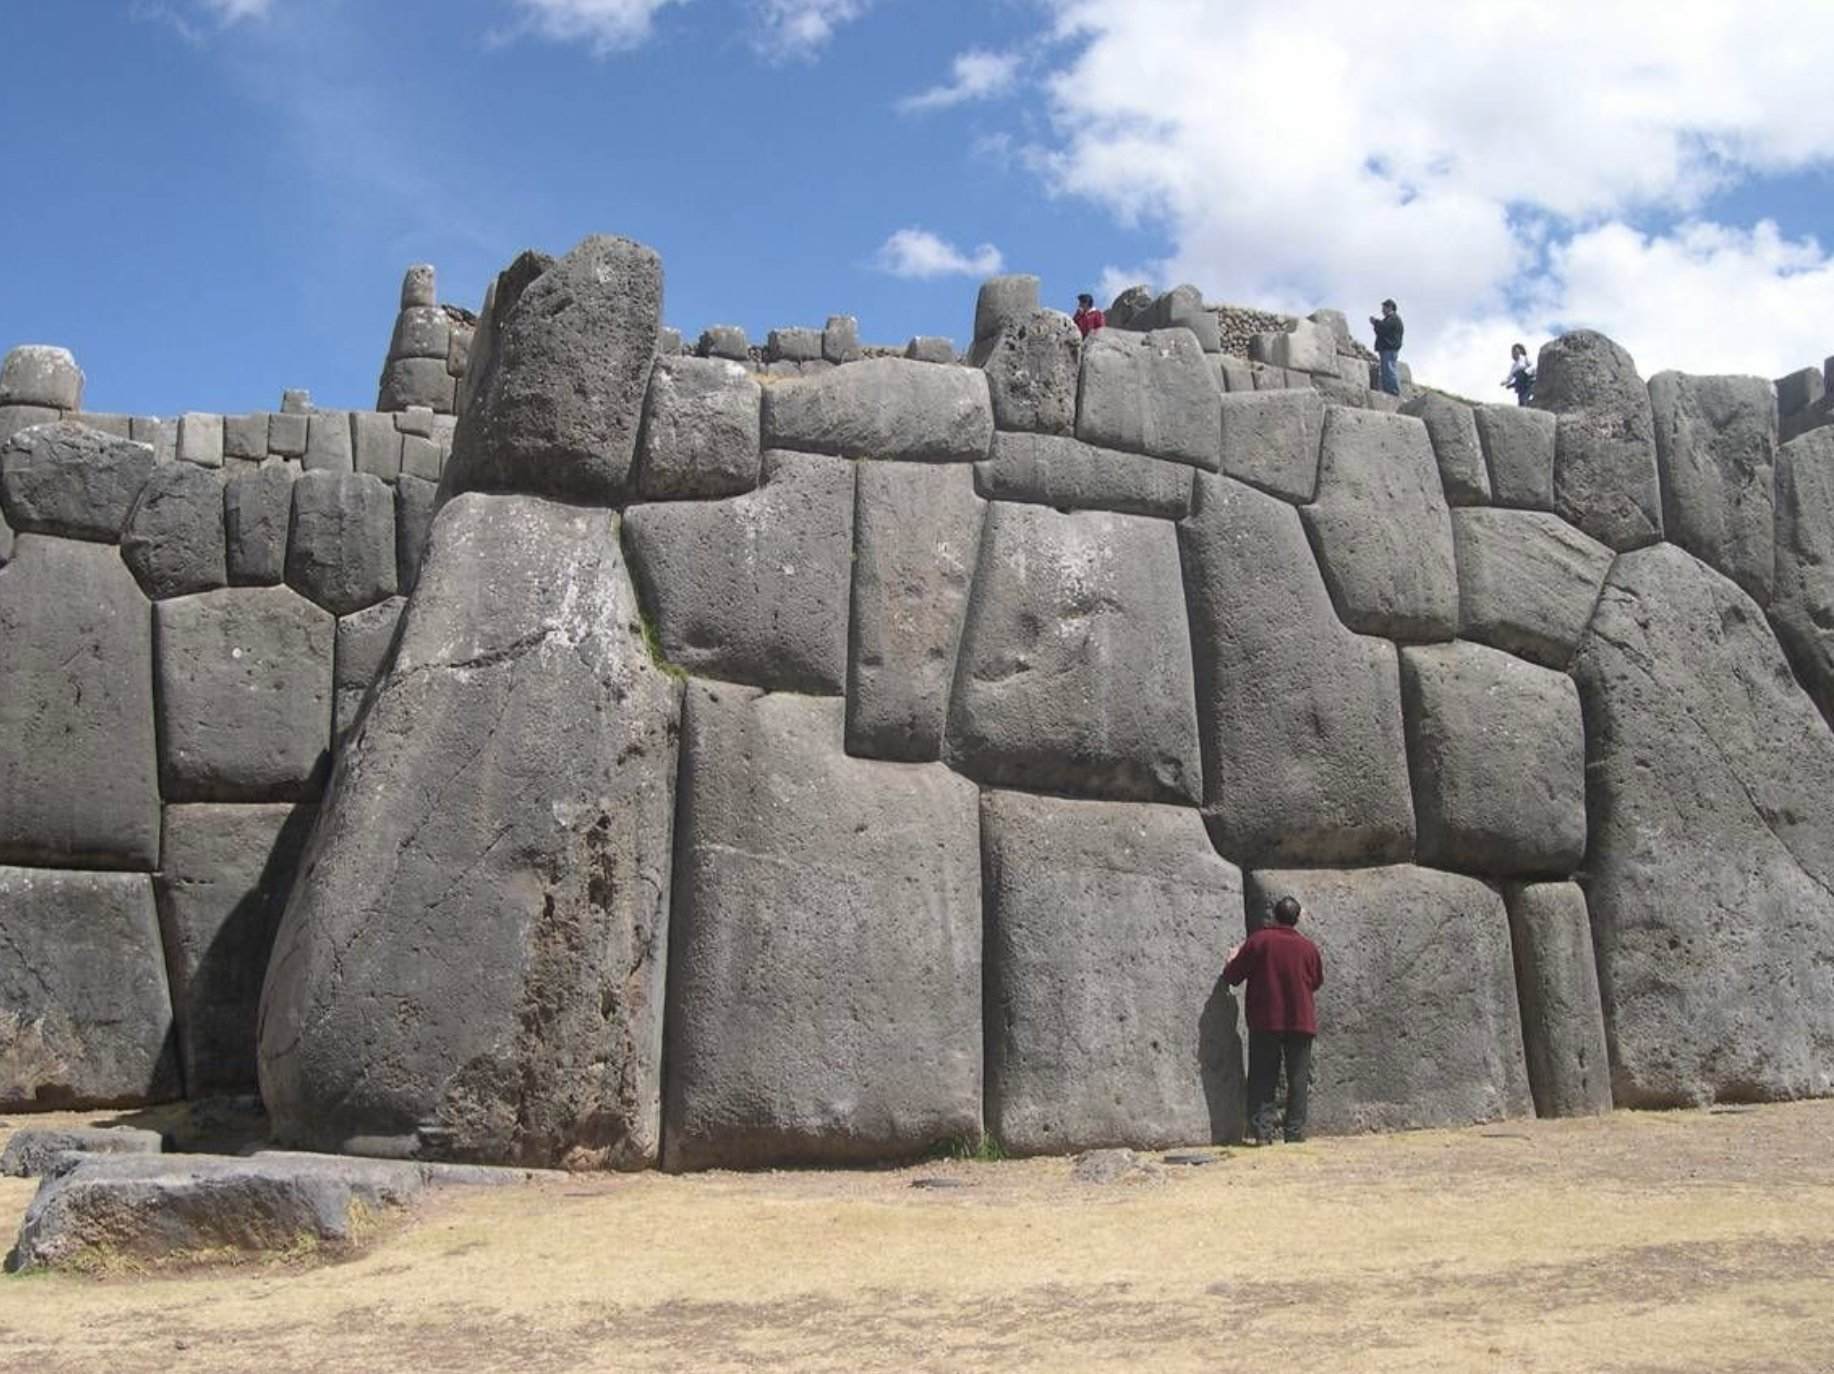 Could ancient Peruvians really know how to melt stone blocks? 2